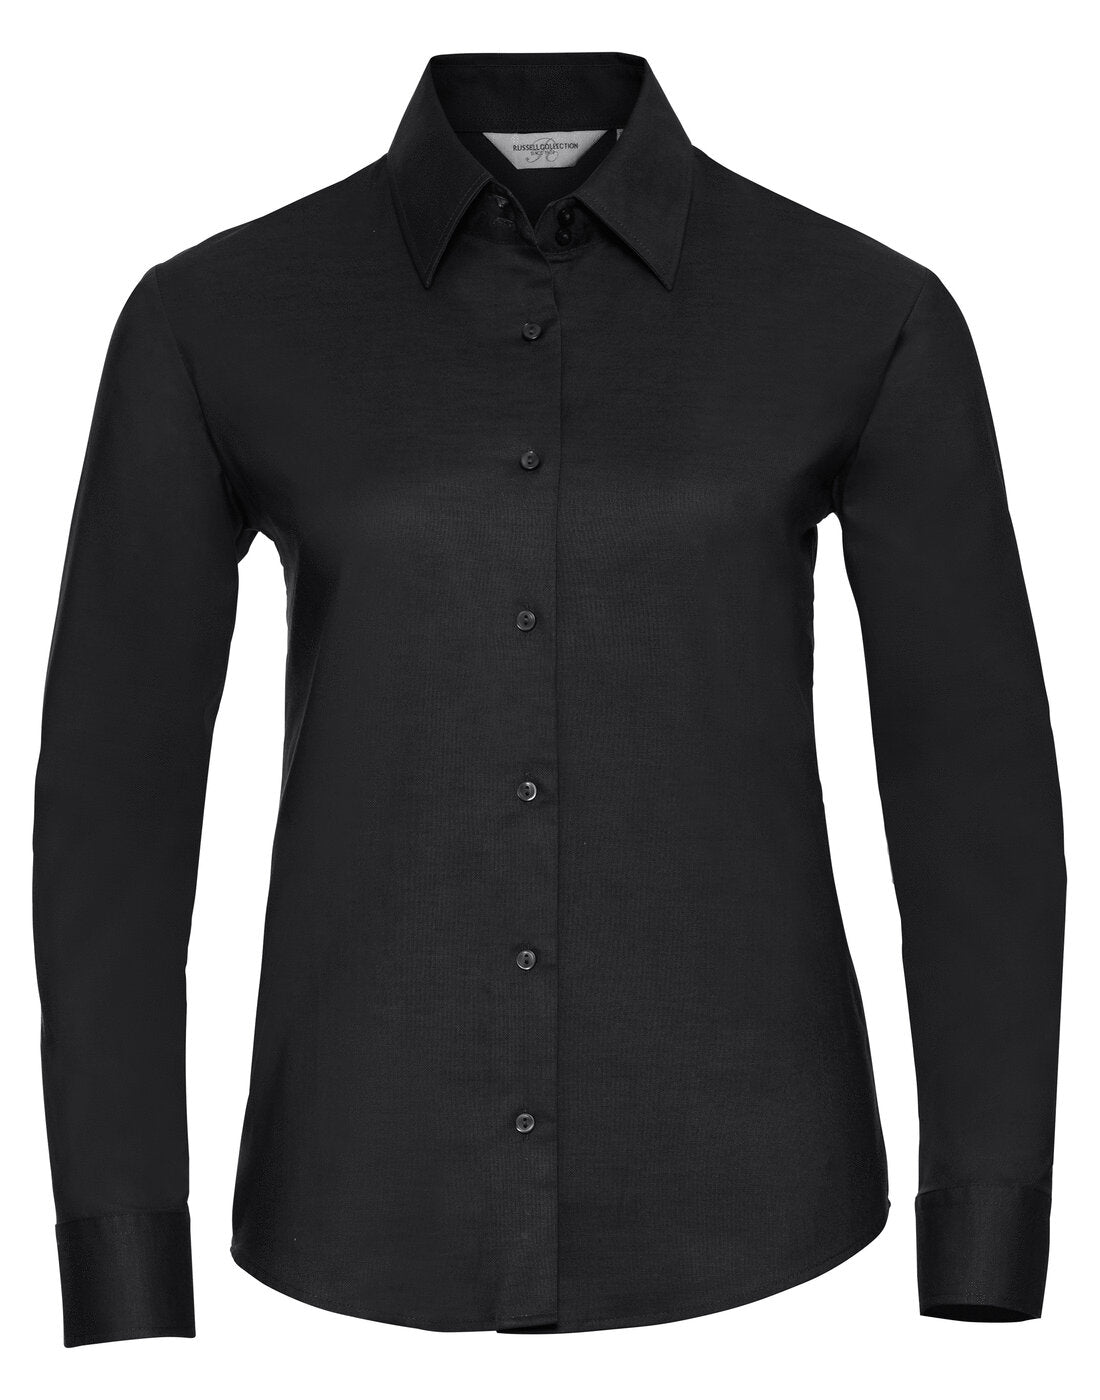 Russell Ladies Long Sleeve Tailored Oxford Shirt Black